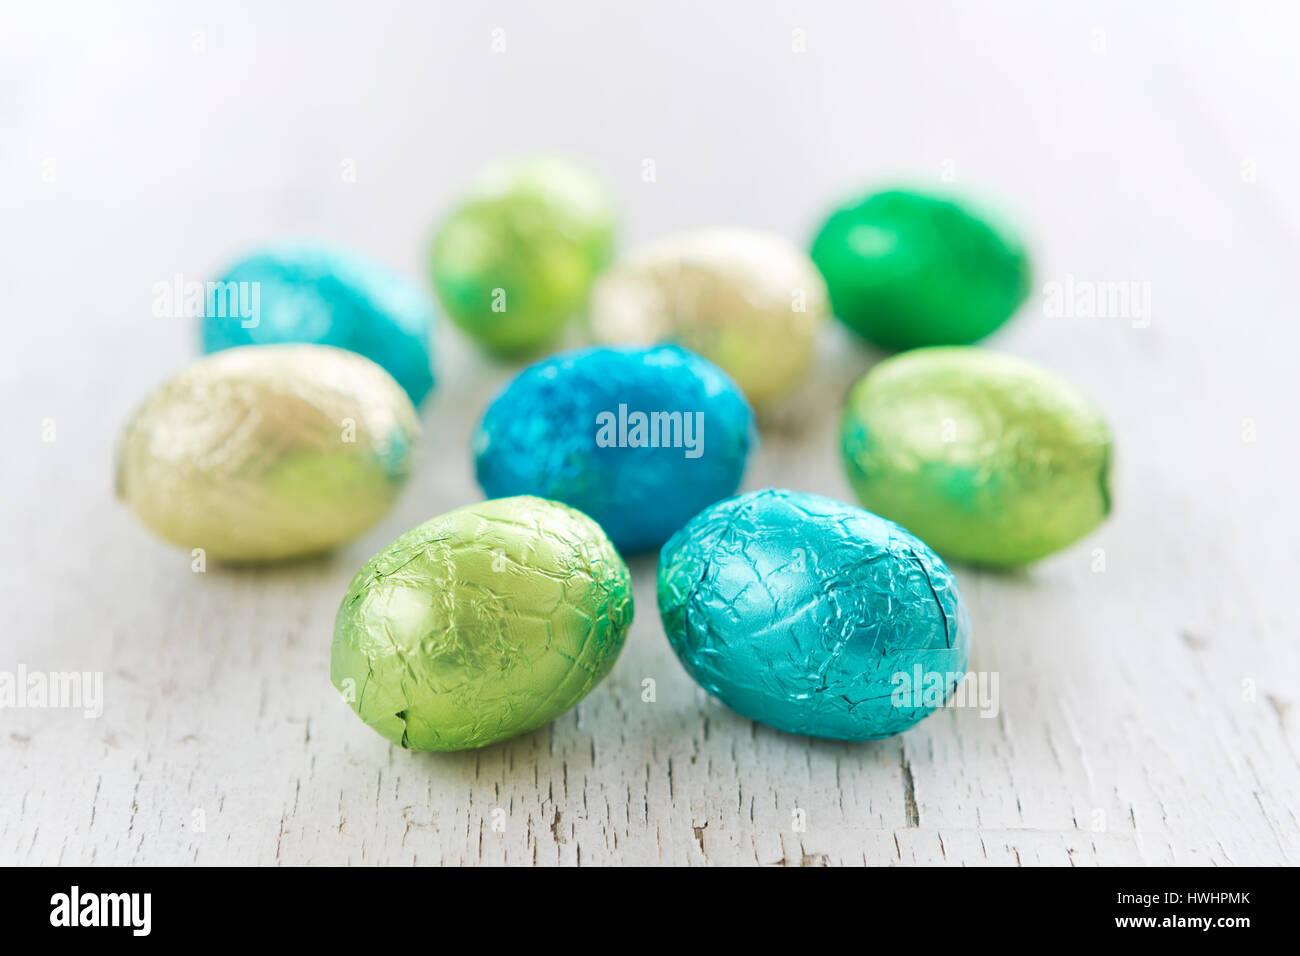 Close up of an assortment of chocolate Easter eggs on a rustic wooden background. Stock Photo